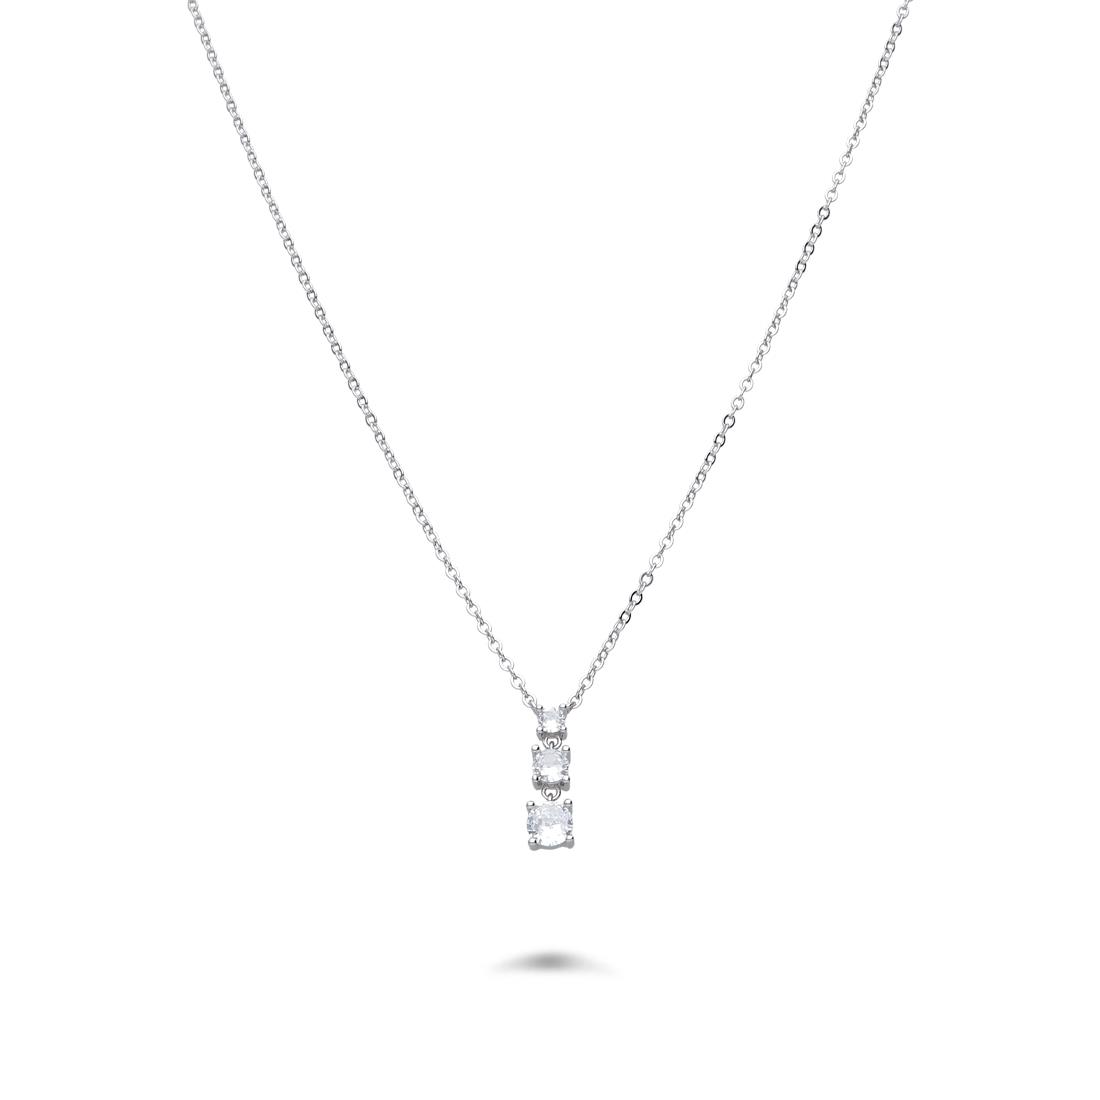 Trilogy necklace in silver with white zircons - LUXURY MILANO